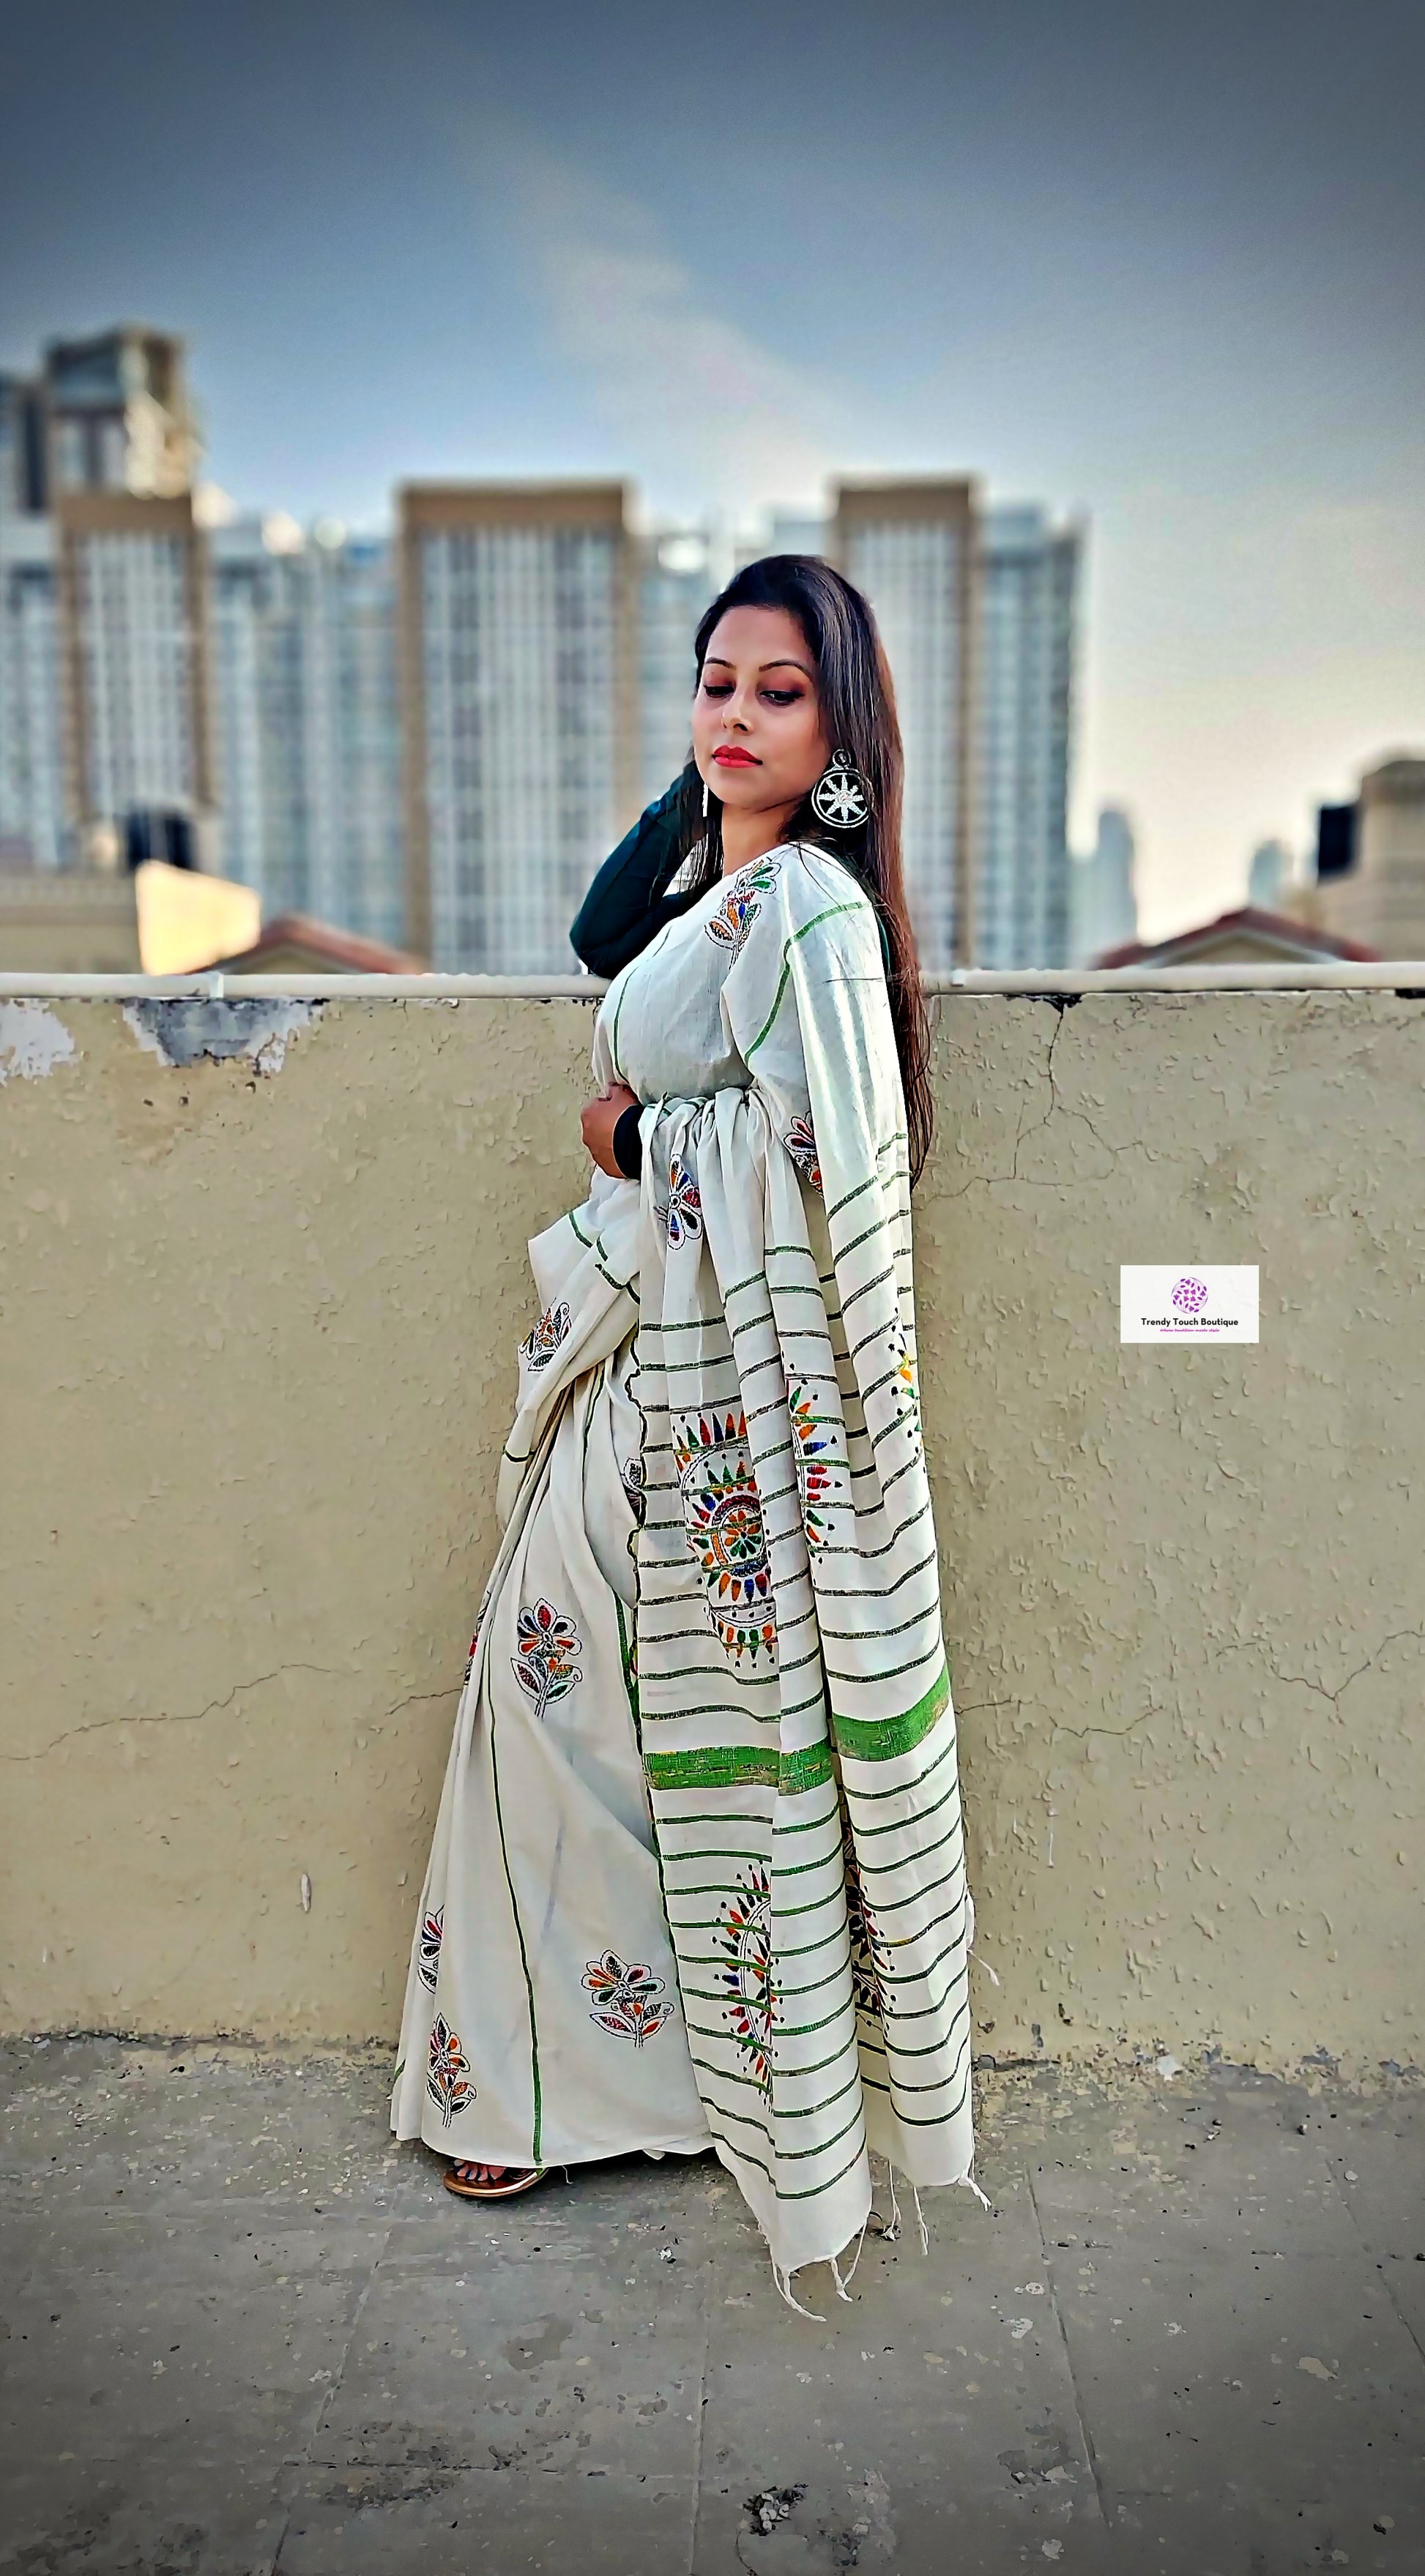 Kantha Stitch Work hand embroidered white Designer pure khesh khadi cotton handloom Saree best price new design festive fashion wedding party wear marriage function special occasion with blouse piece